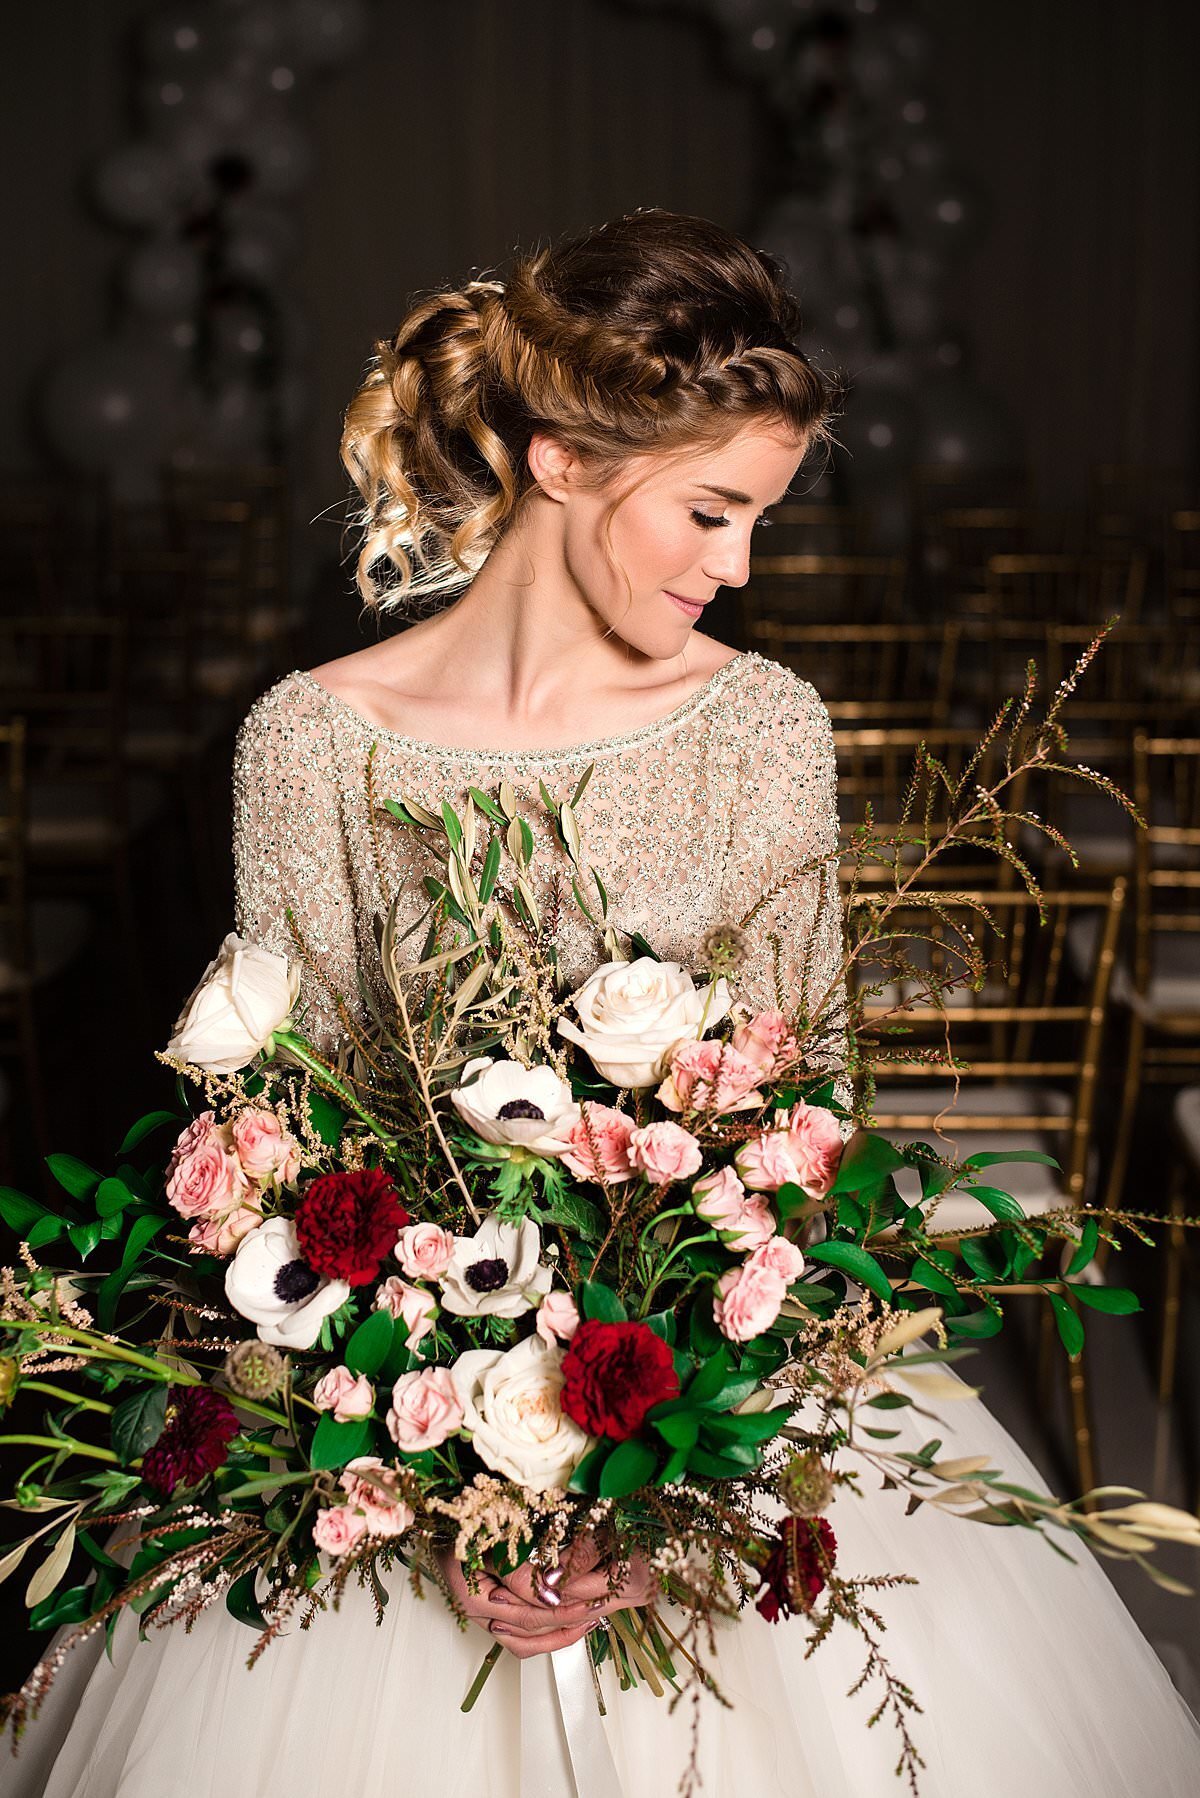 Bride with an intricately braided updo holding a large bouquet filled with anemones, pink and burgundy flowers